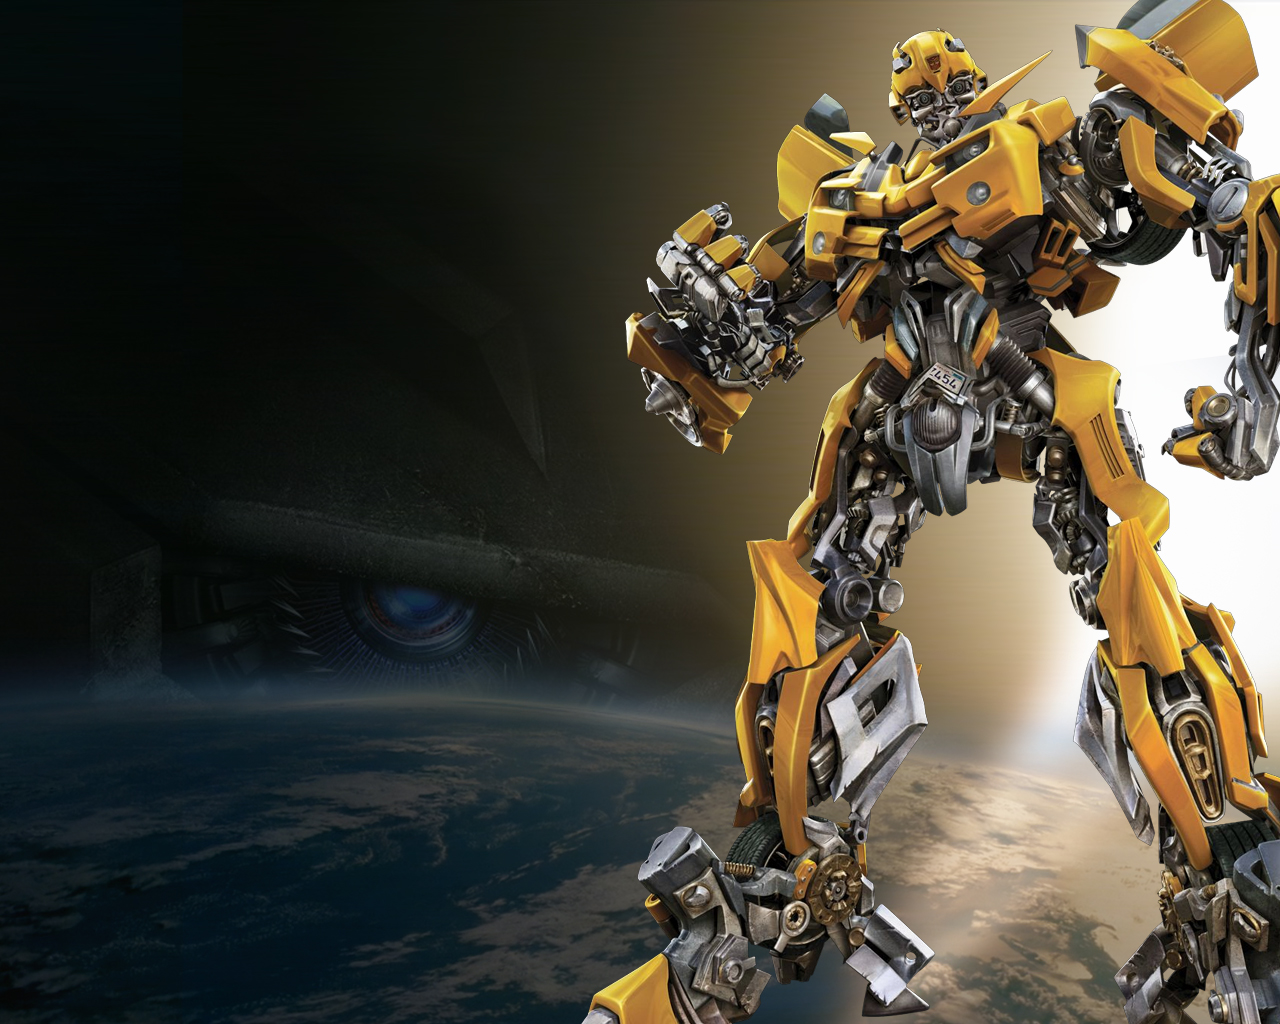 Transformers Wallpapers Photos beautifully pictured on Digital Photo